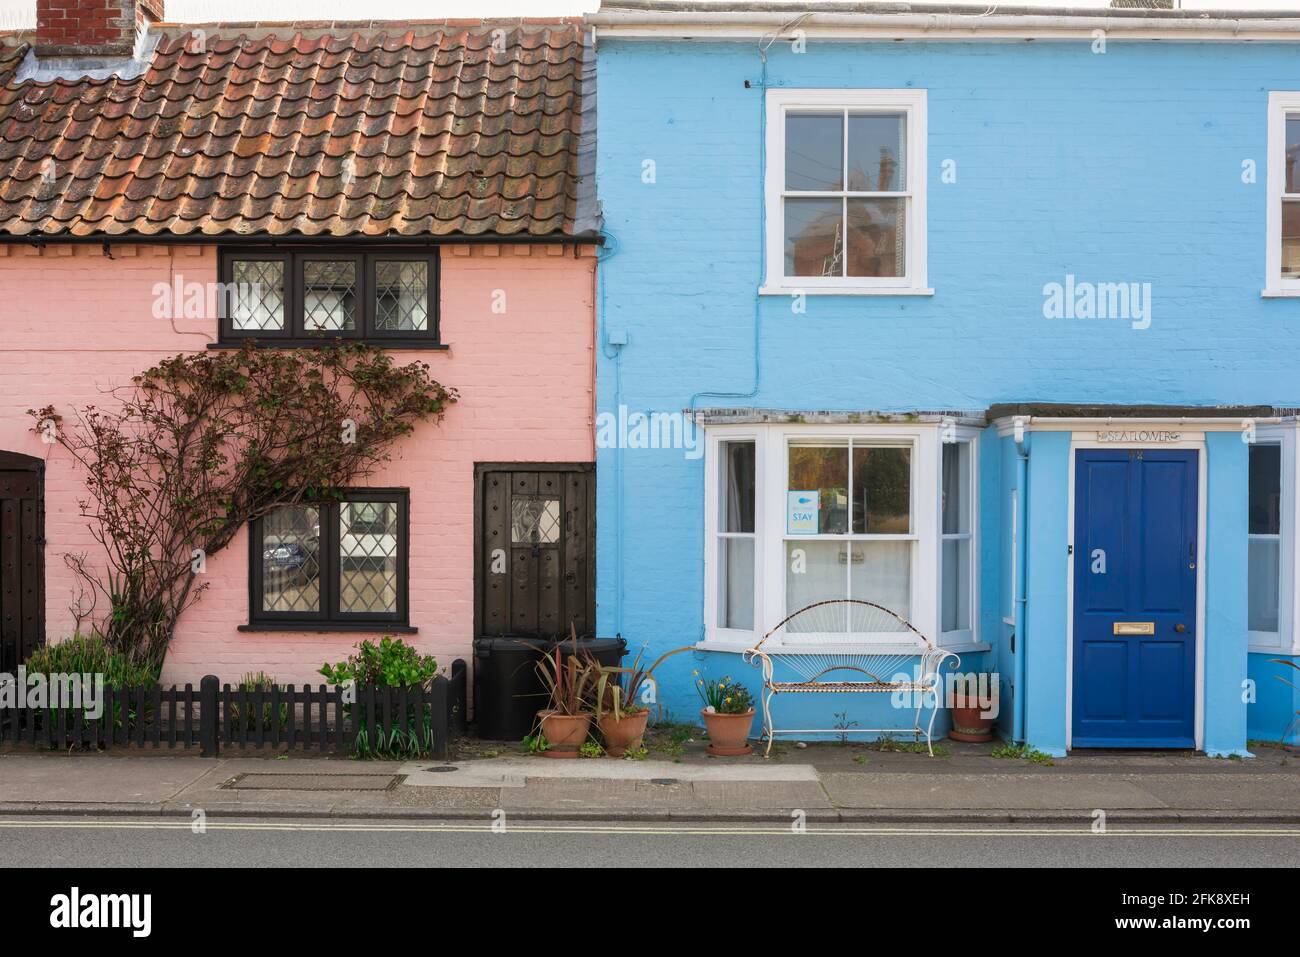 Aldeburgh house, view of colourful period residential property sited in a street along the seafront at Aldeburgh, Suffolk, England, UK Stock Photo